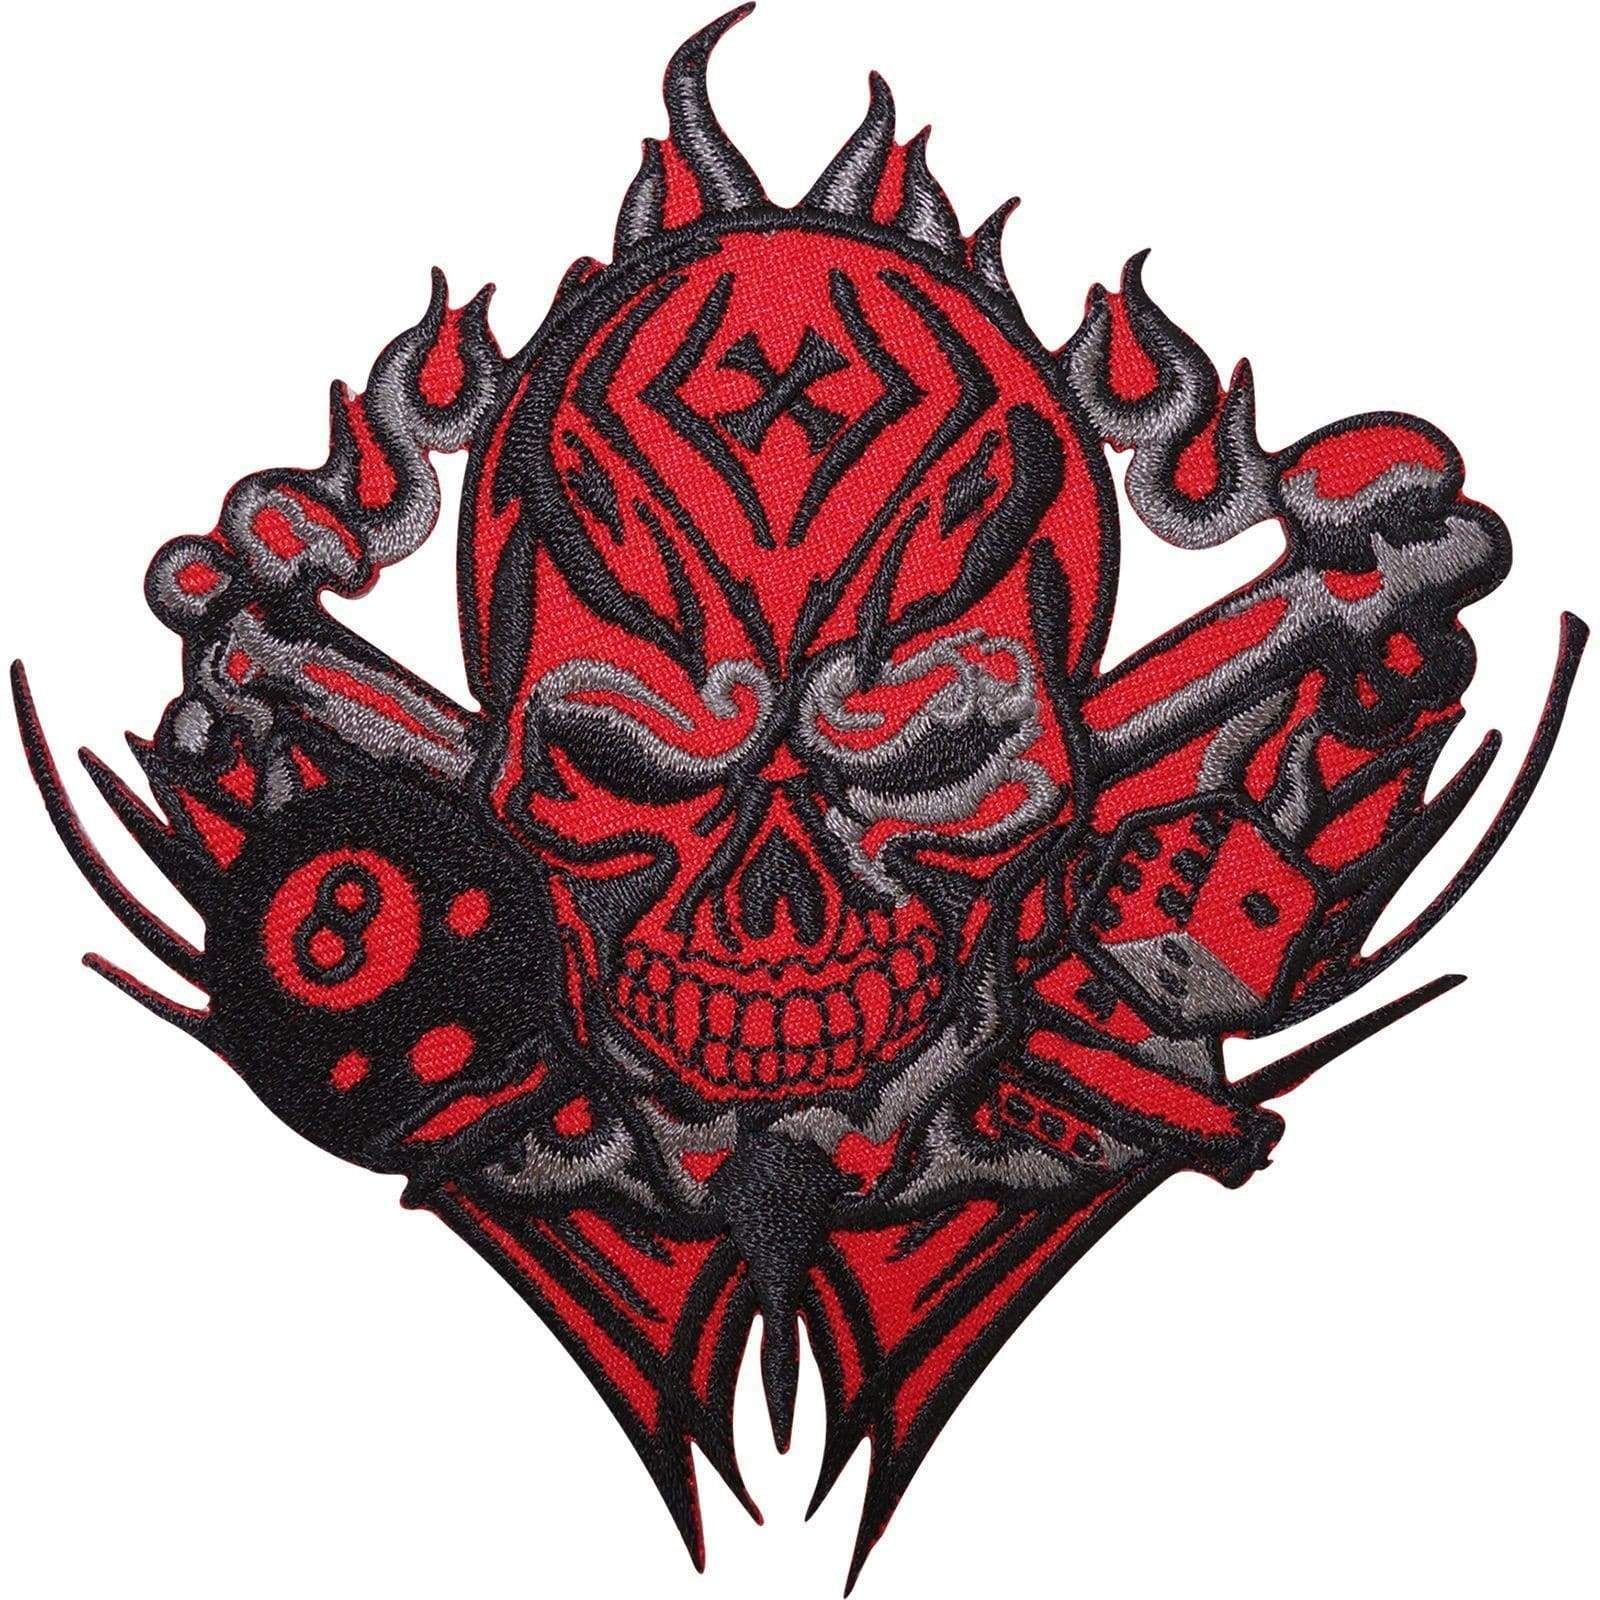  PARITA Cute Black Skull tie a red Bow and red Heart Eyes Iron  on Cartoon Patches Ghost Zombie Death Biker Embroidered Motorcycle MC Club  Biker Vest Patch sew on Patches Badge (